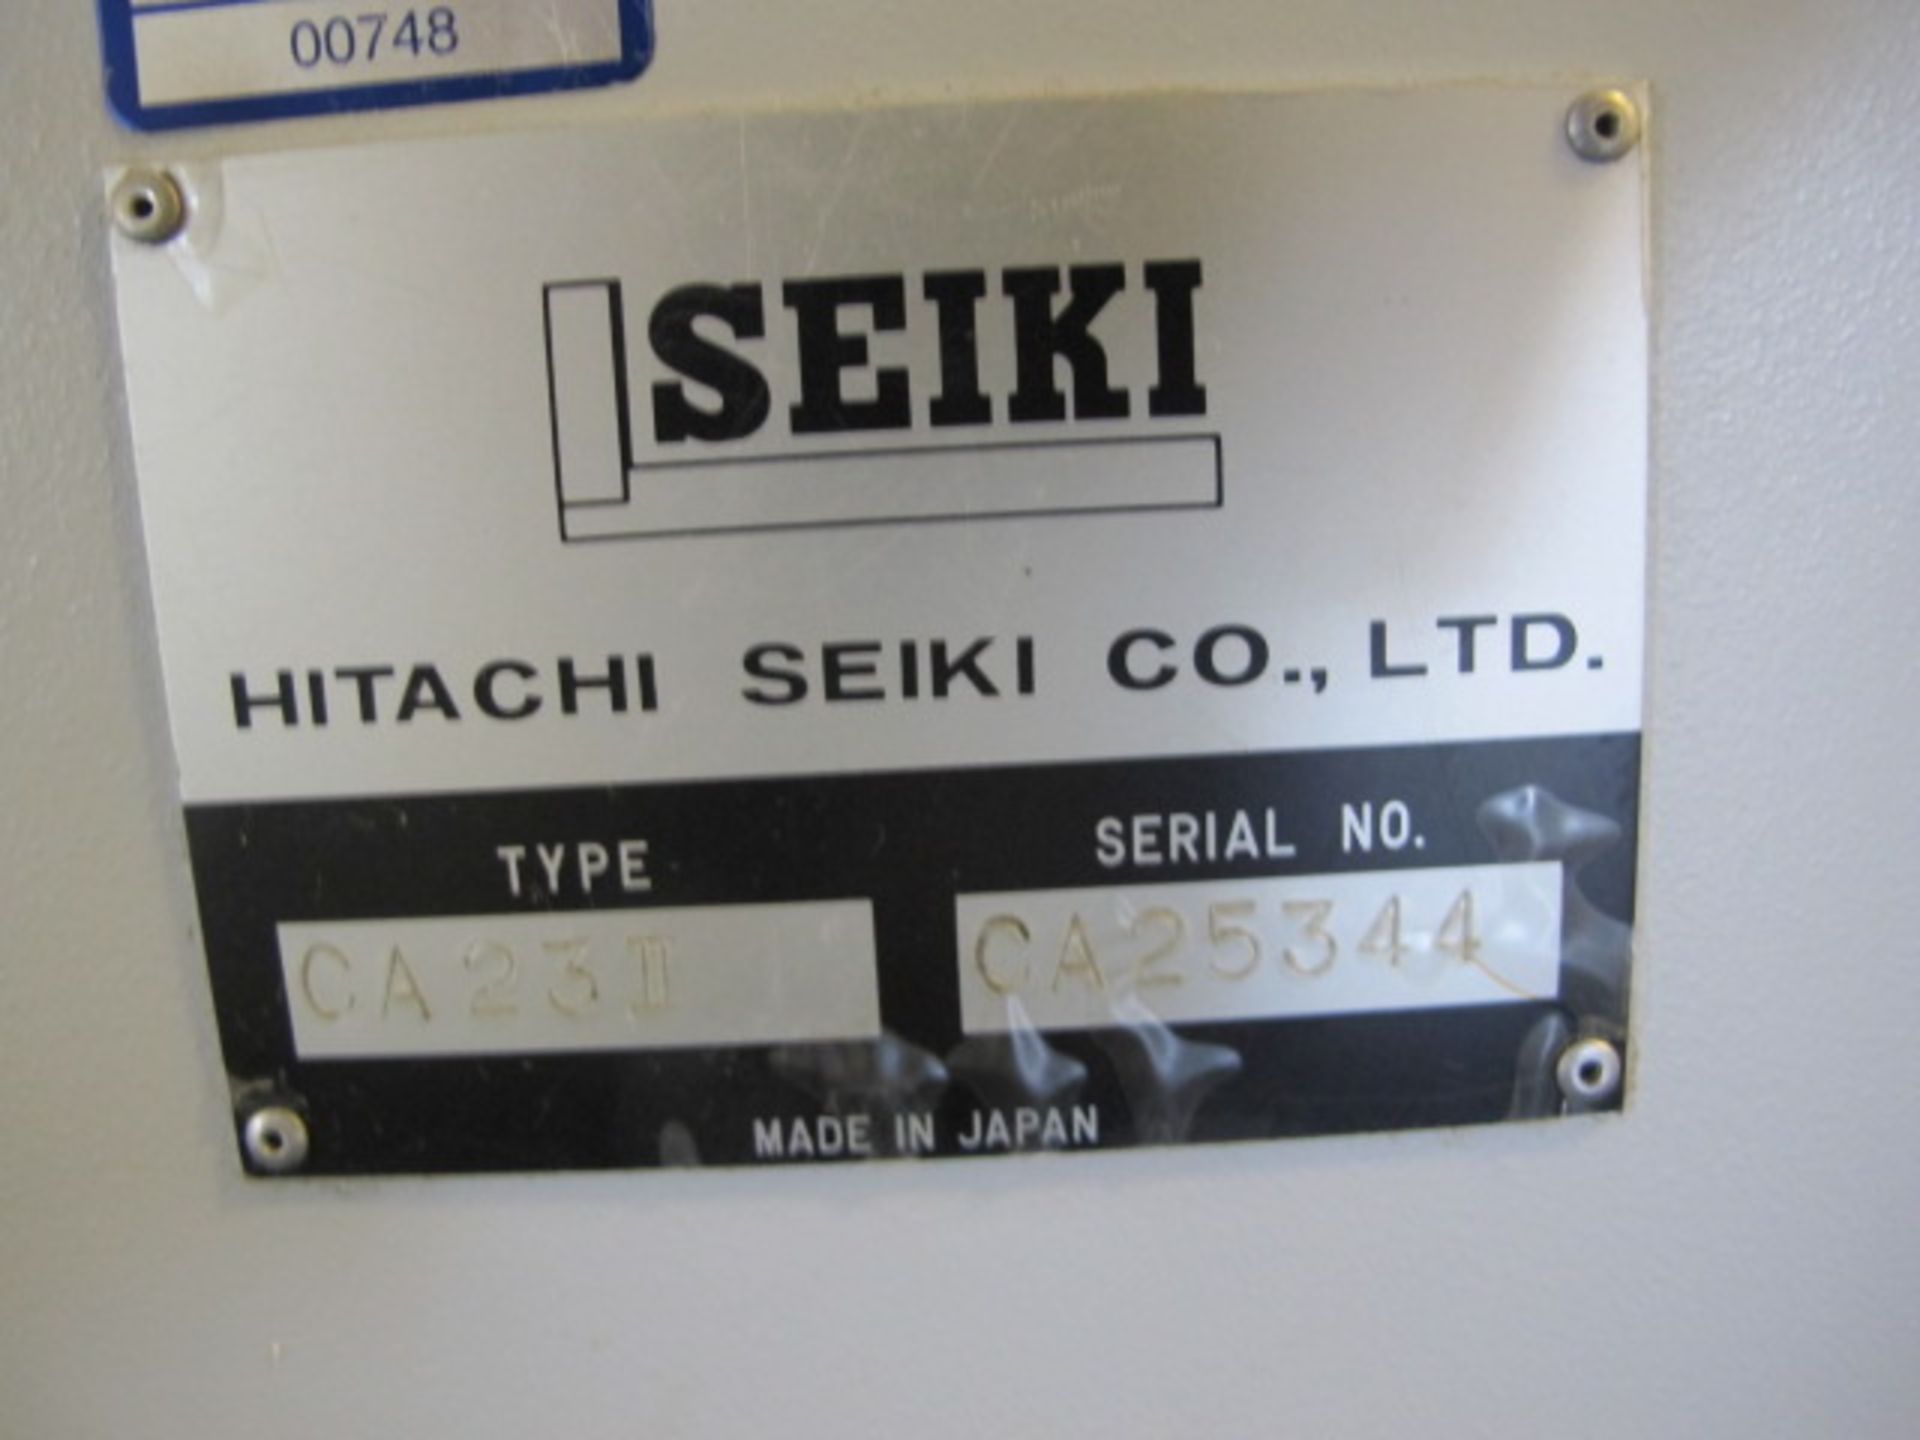 2001 Hitachi Seiki HiCELL23 II Super Productive Integrated Turning Cell Type CA23 II s/n CA25344 - Image 21 of 21